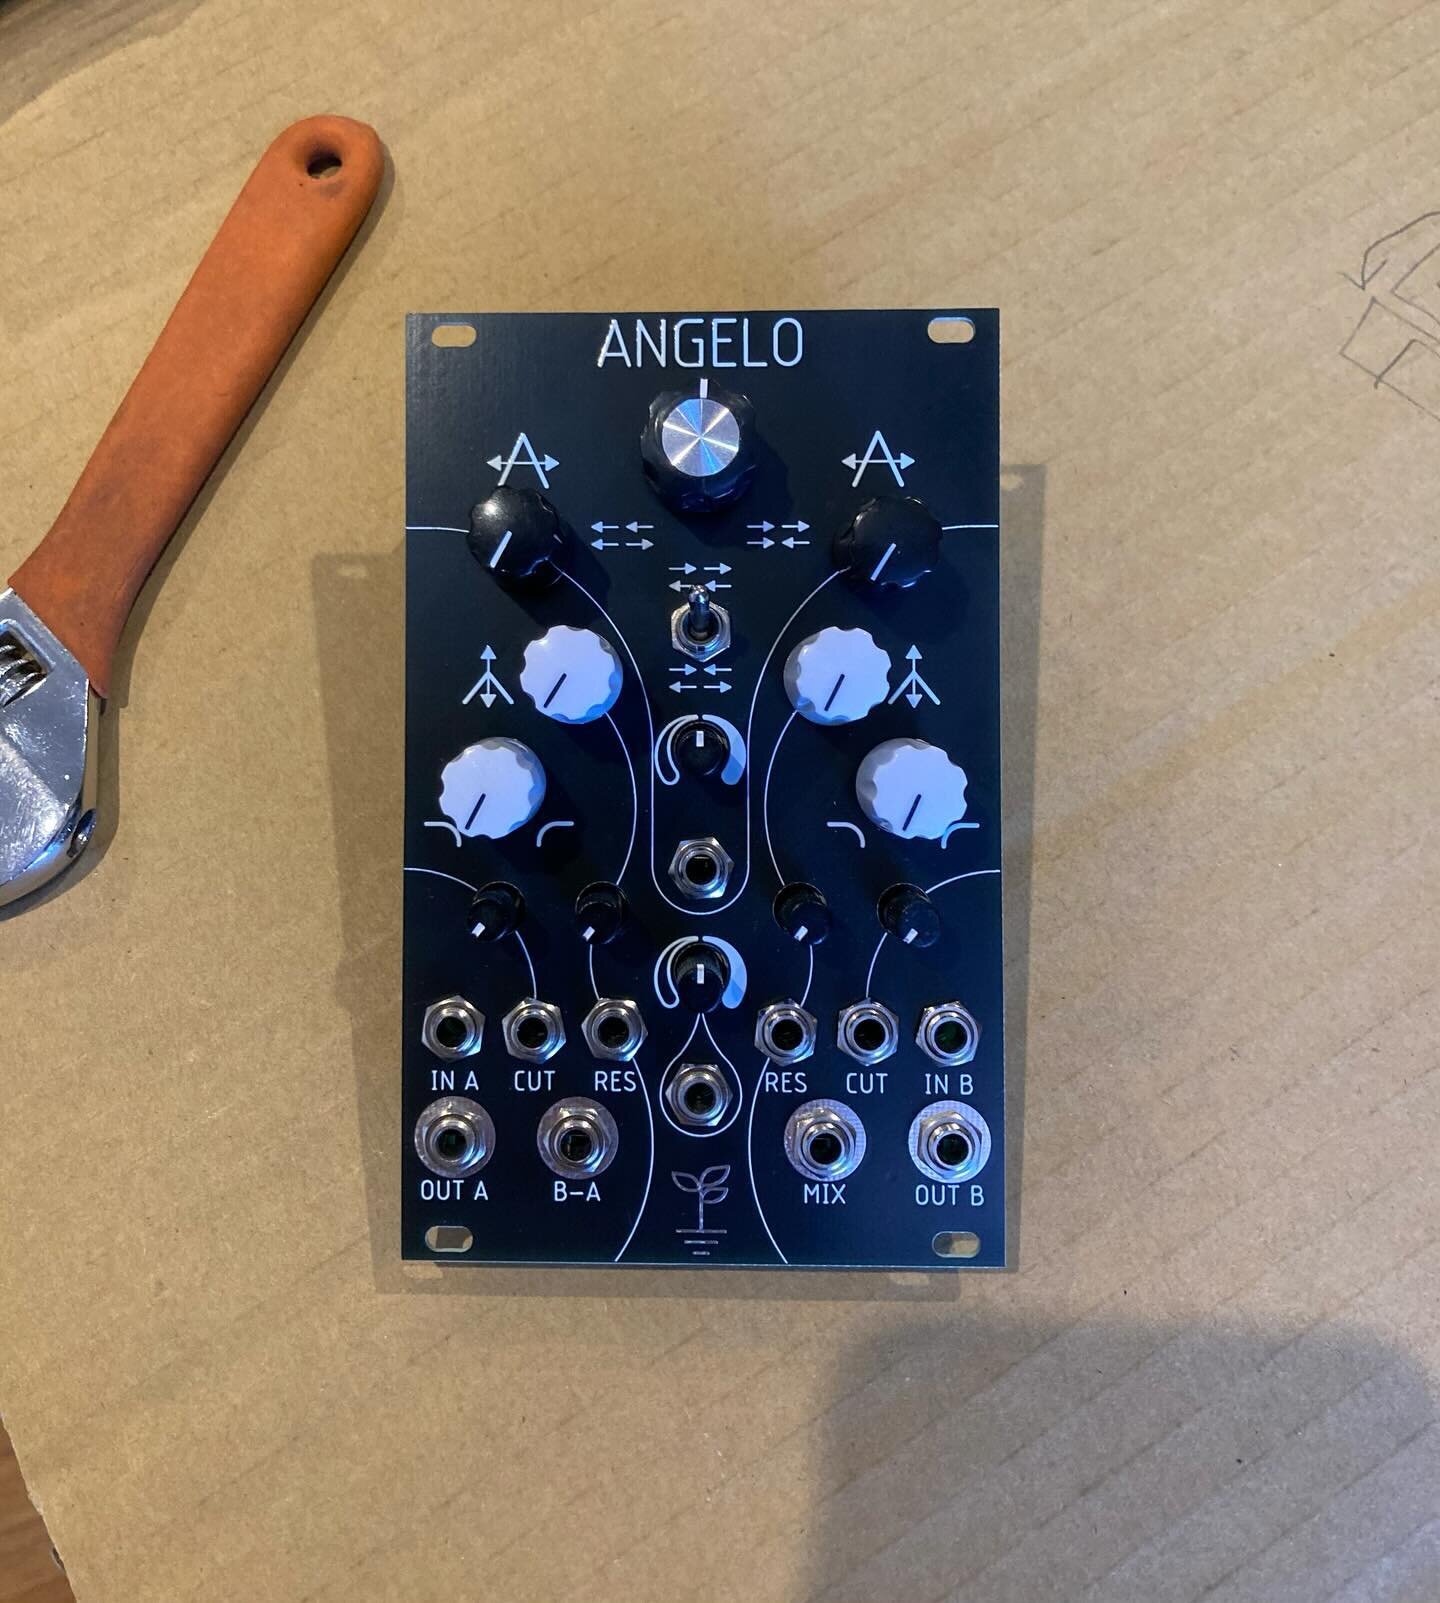 My new Dual Filter module, Angelo, is available. Contact me to order.
#eurorack #euroracksynth #modularsynth #modularsynthesizer #analog #analogsynth #analogsynthesizer #analogfilter #music